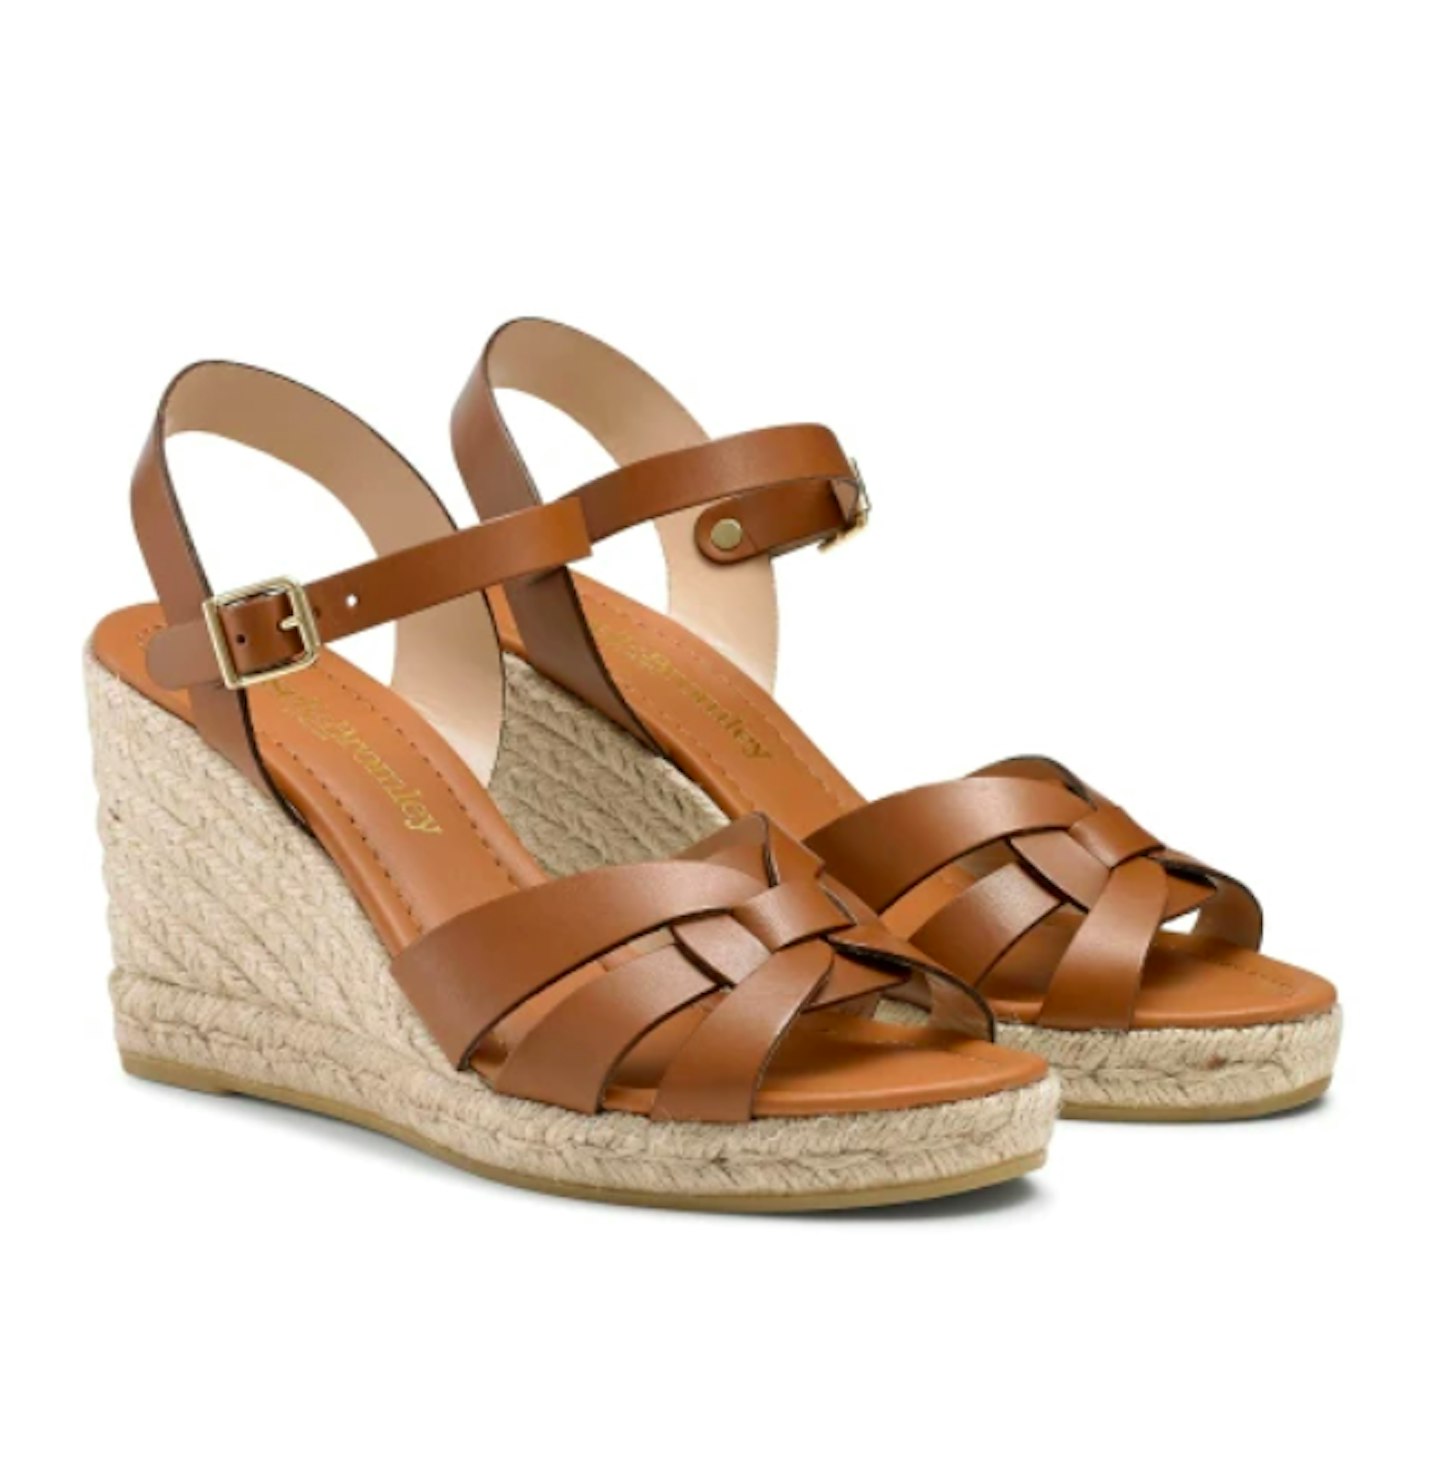 Russell & Bromley, Headspin Woven Espadrille Wedges, £155